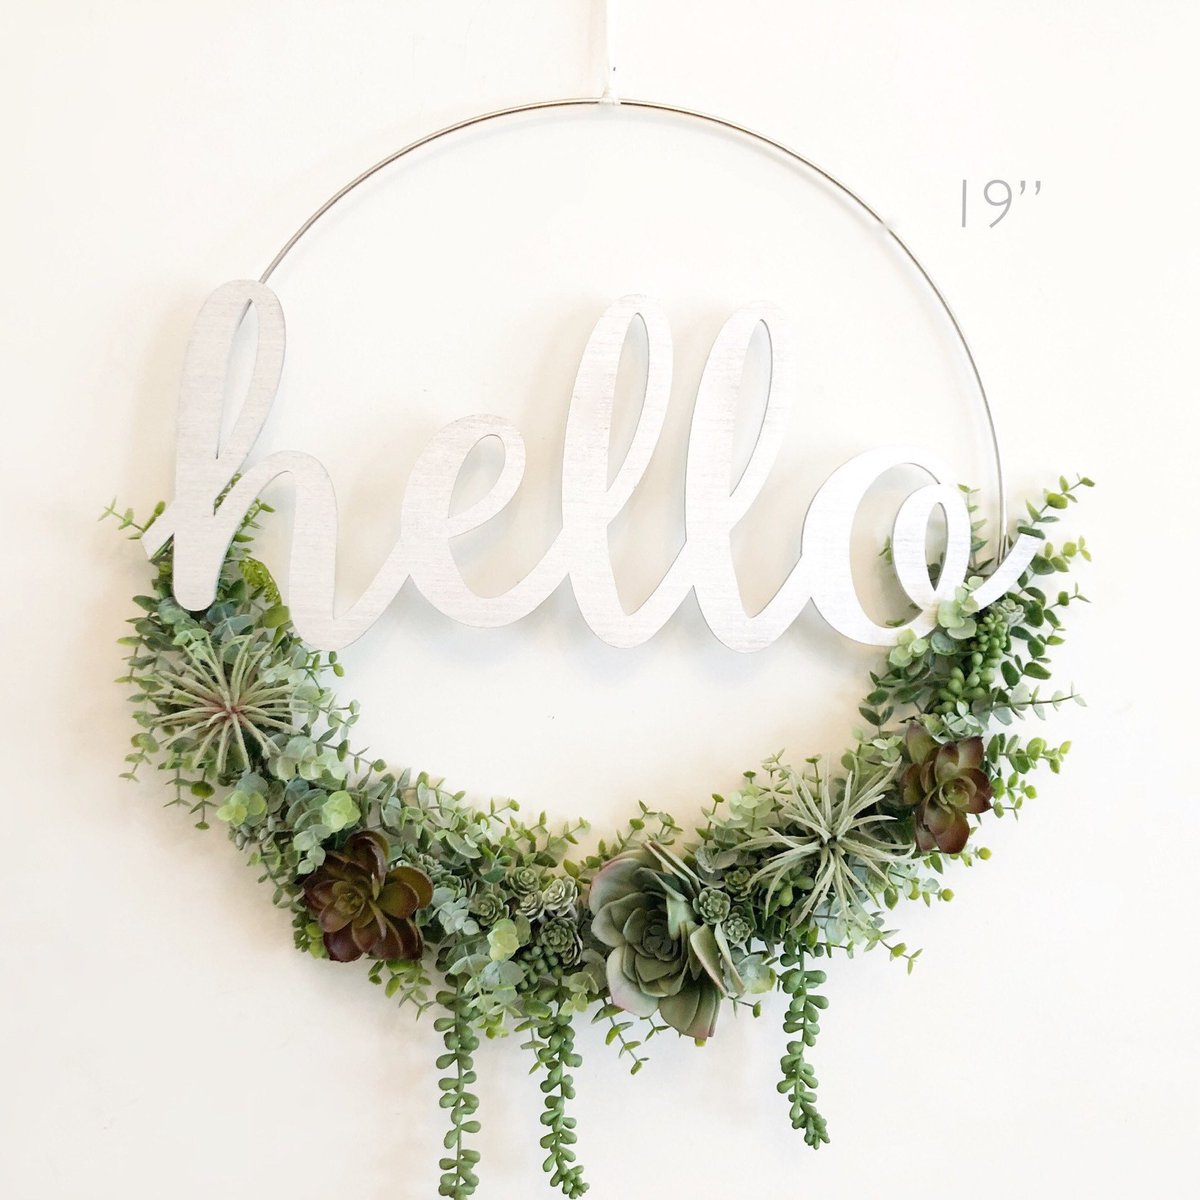 Excited to share this item from my #etsy shop: 19' Succulent Wreath, Farmhouse Style Wreath, Hello Hoop Wreath #housewarming #mothersday #farmhousewreath #lasercutwood #succulentwreath #airplants #wreathsucculents #modernhomedecor #greensucculents etsy.me/3IMCZft